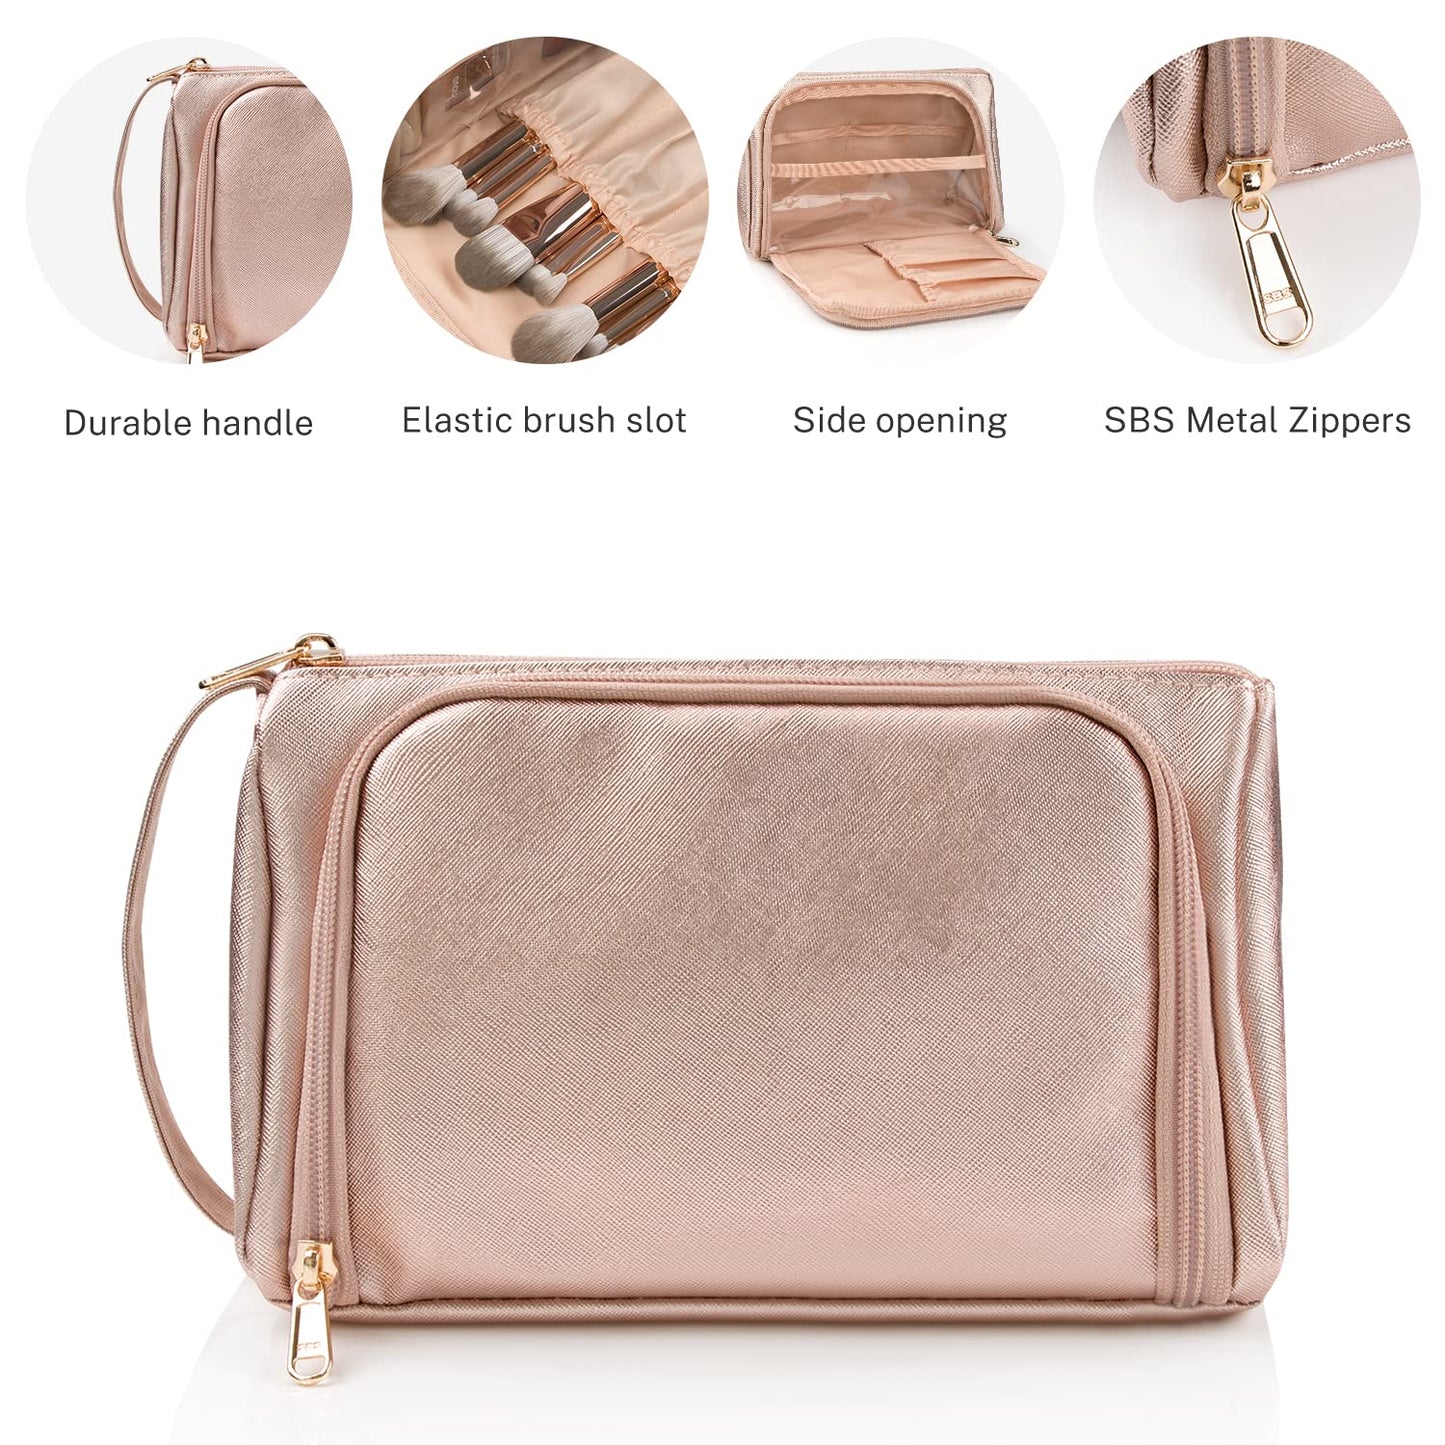 Small Makeup Bag, Makeup Pouch, Travel Cosmetic Organizer for Women and Girls (Oxford Cloth, Rose gold)